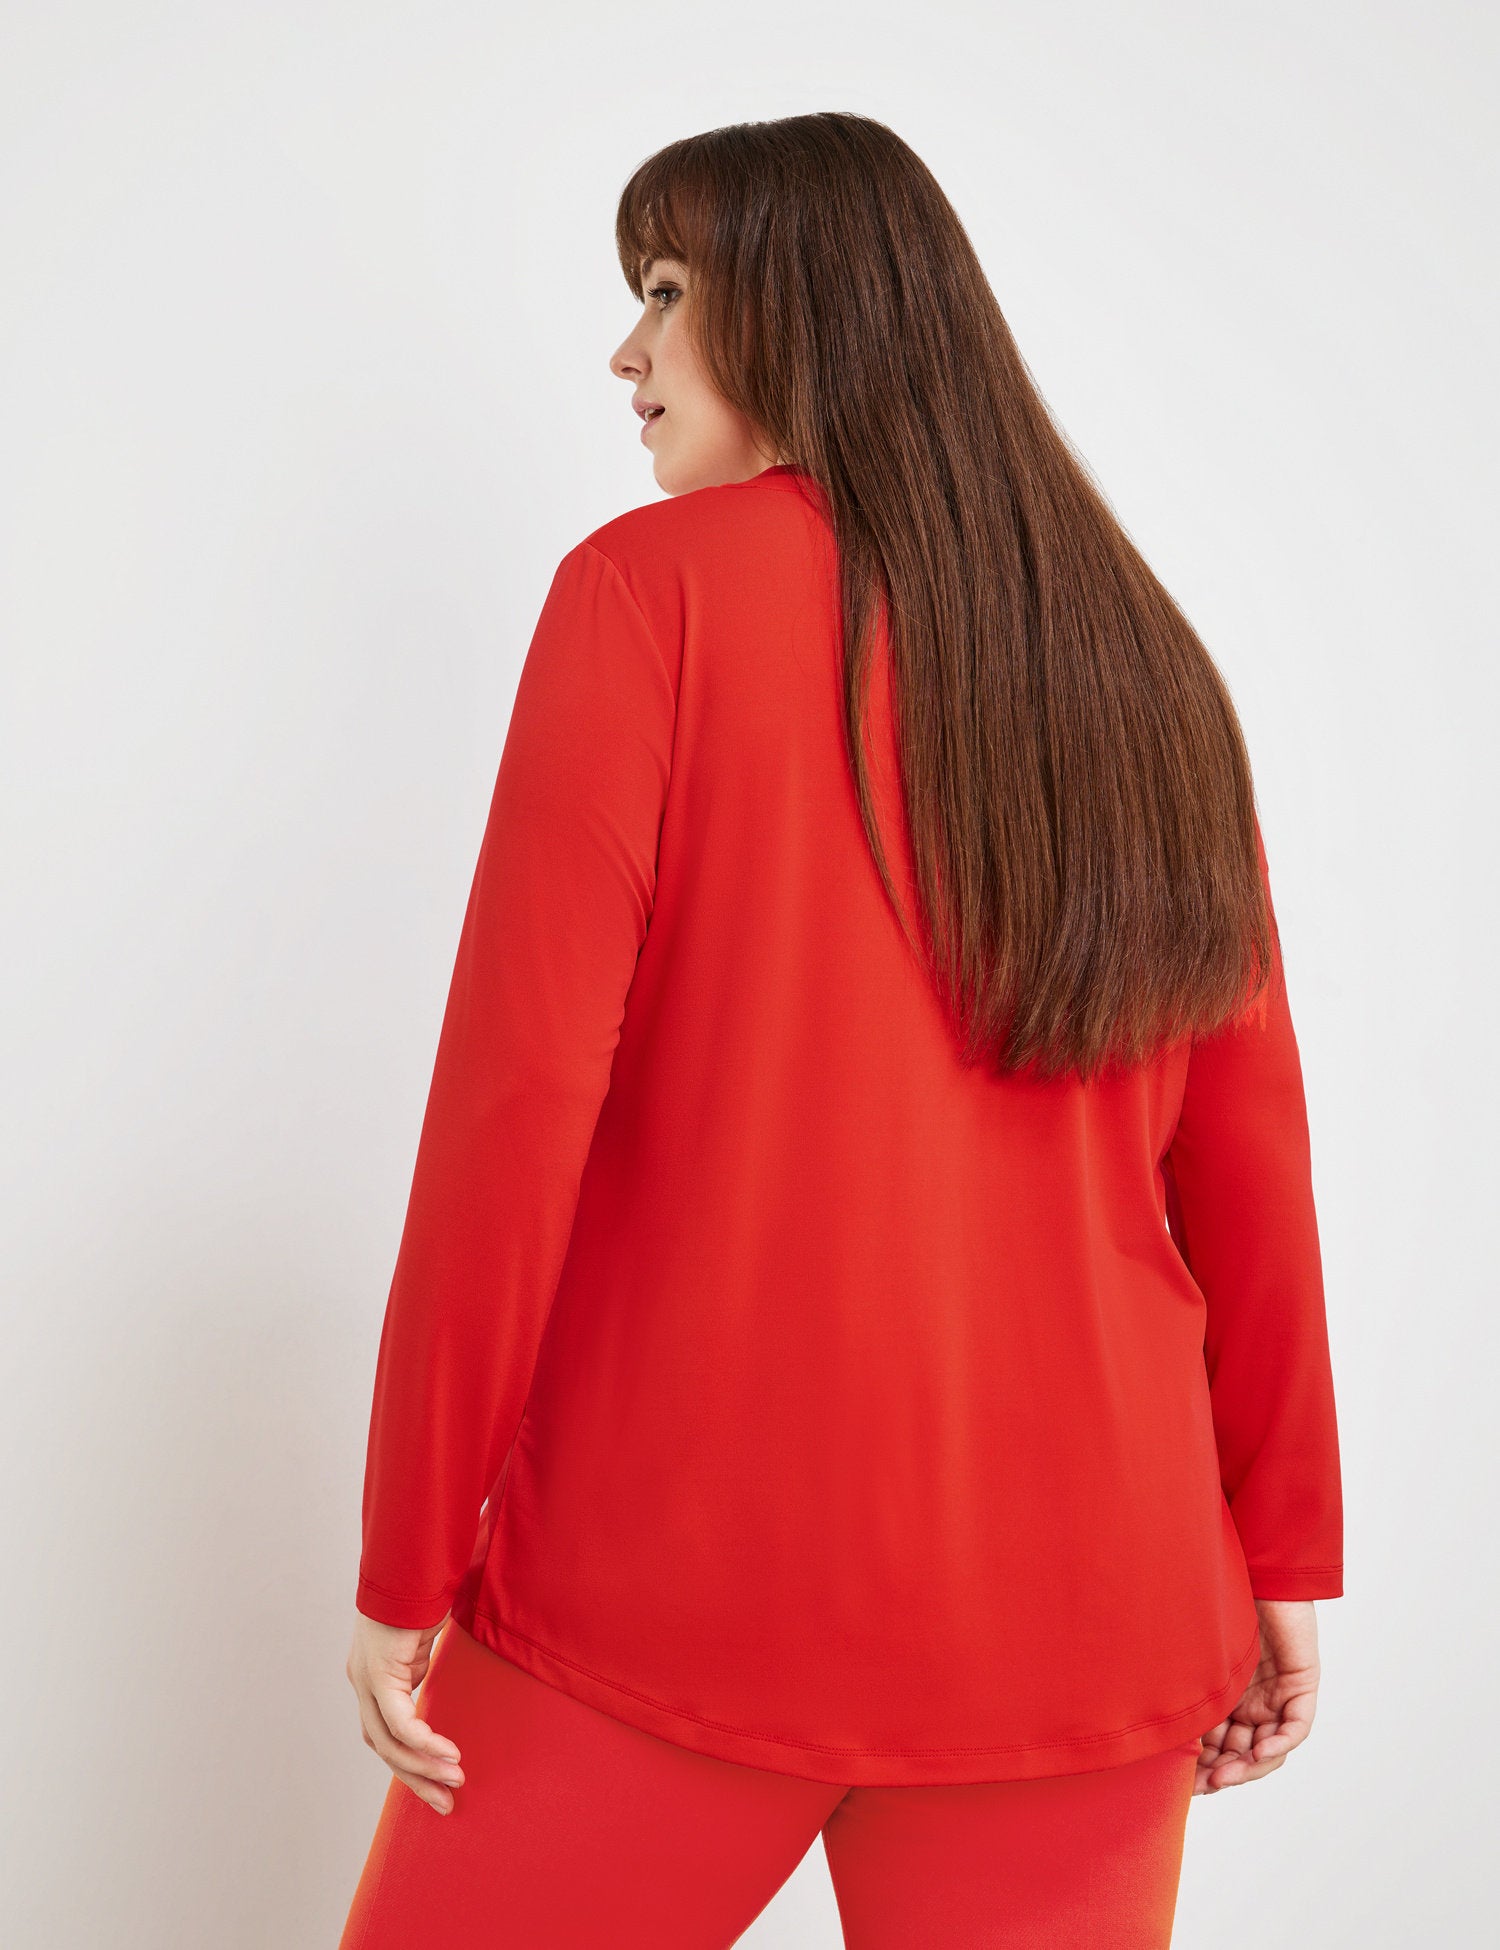 Casual Long Sleeve Top With A V-Neckline_371237-26408_6380_06